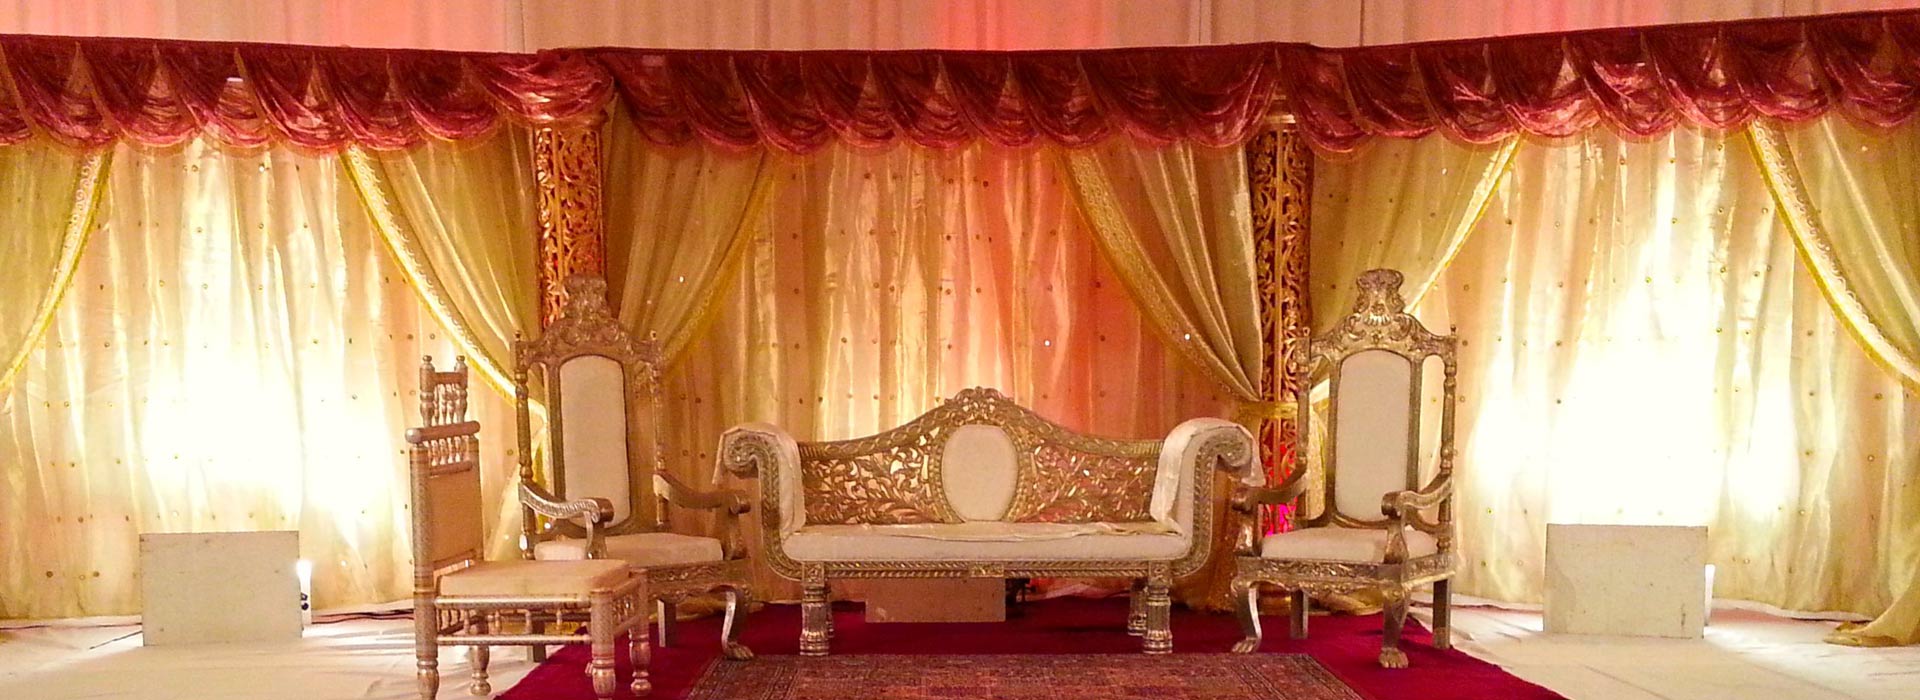 Indian Wedding Stage Decoration Services Events Planners